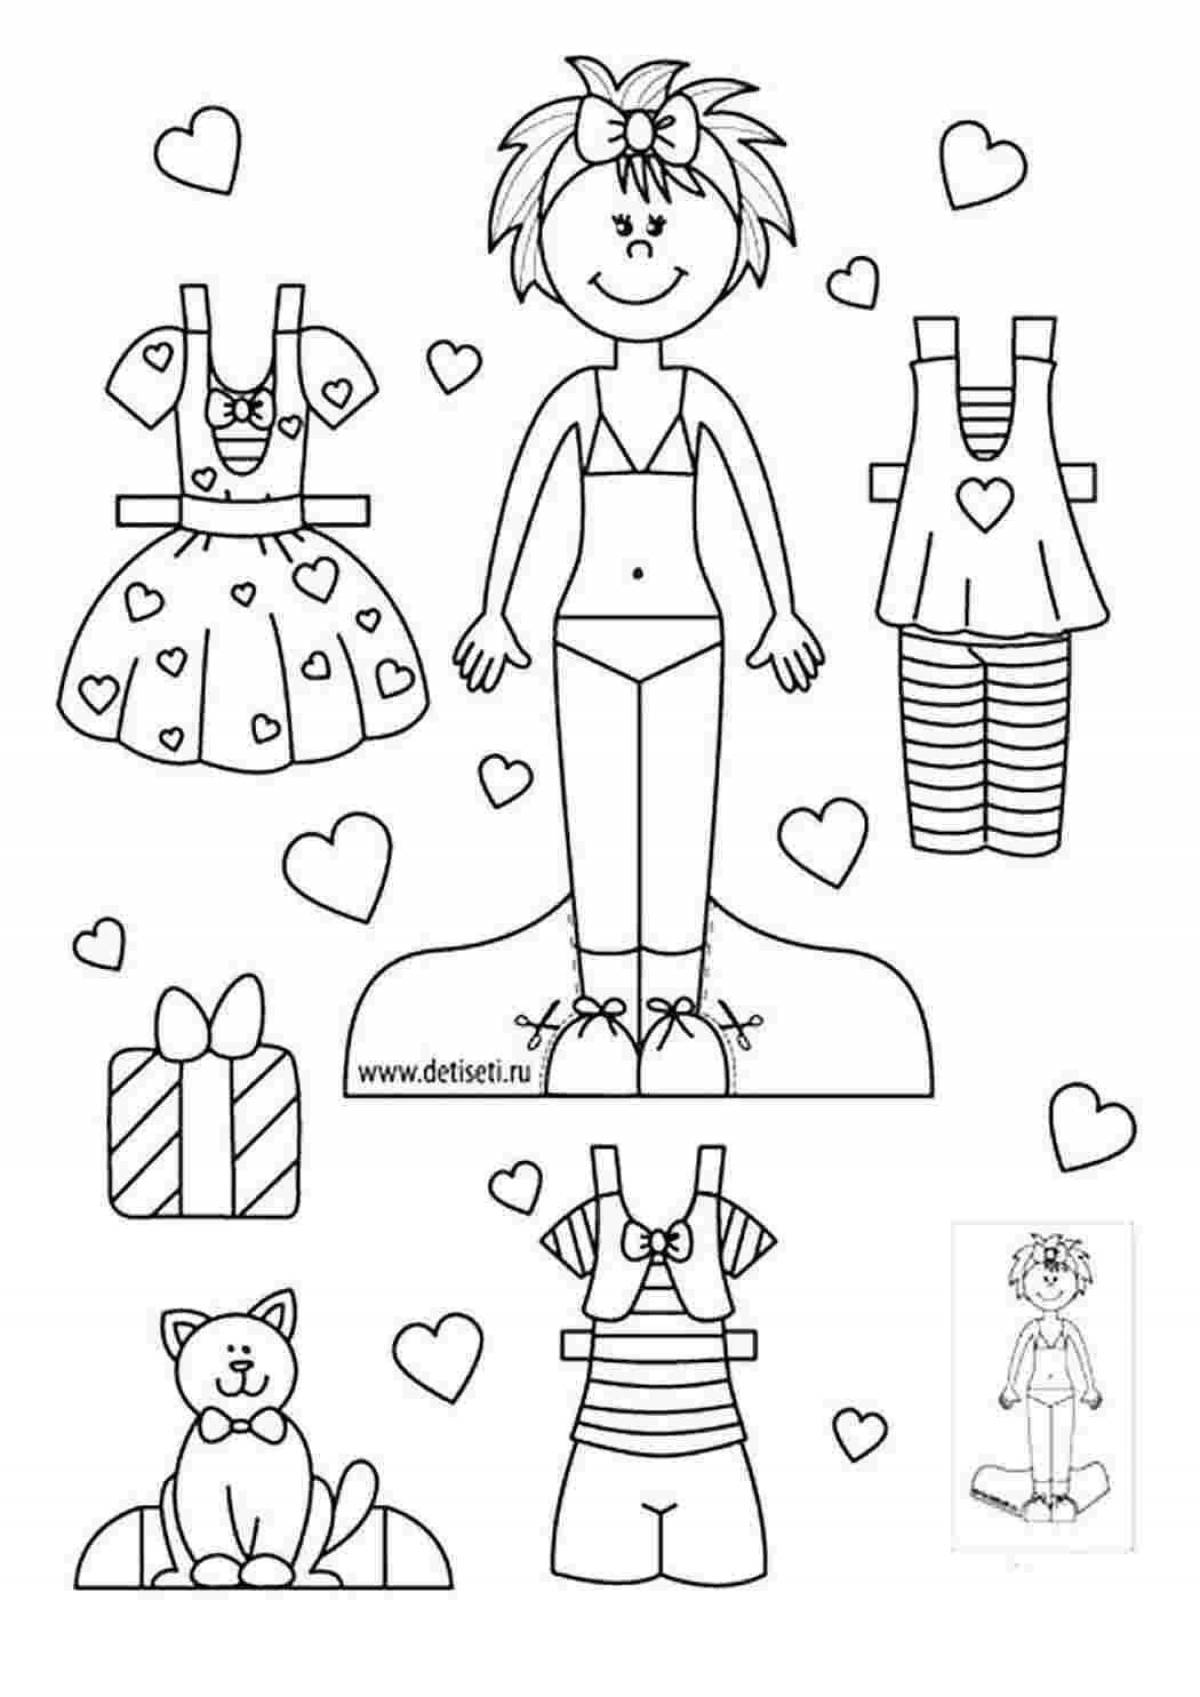 Creative paper dolls with clothes